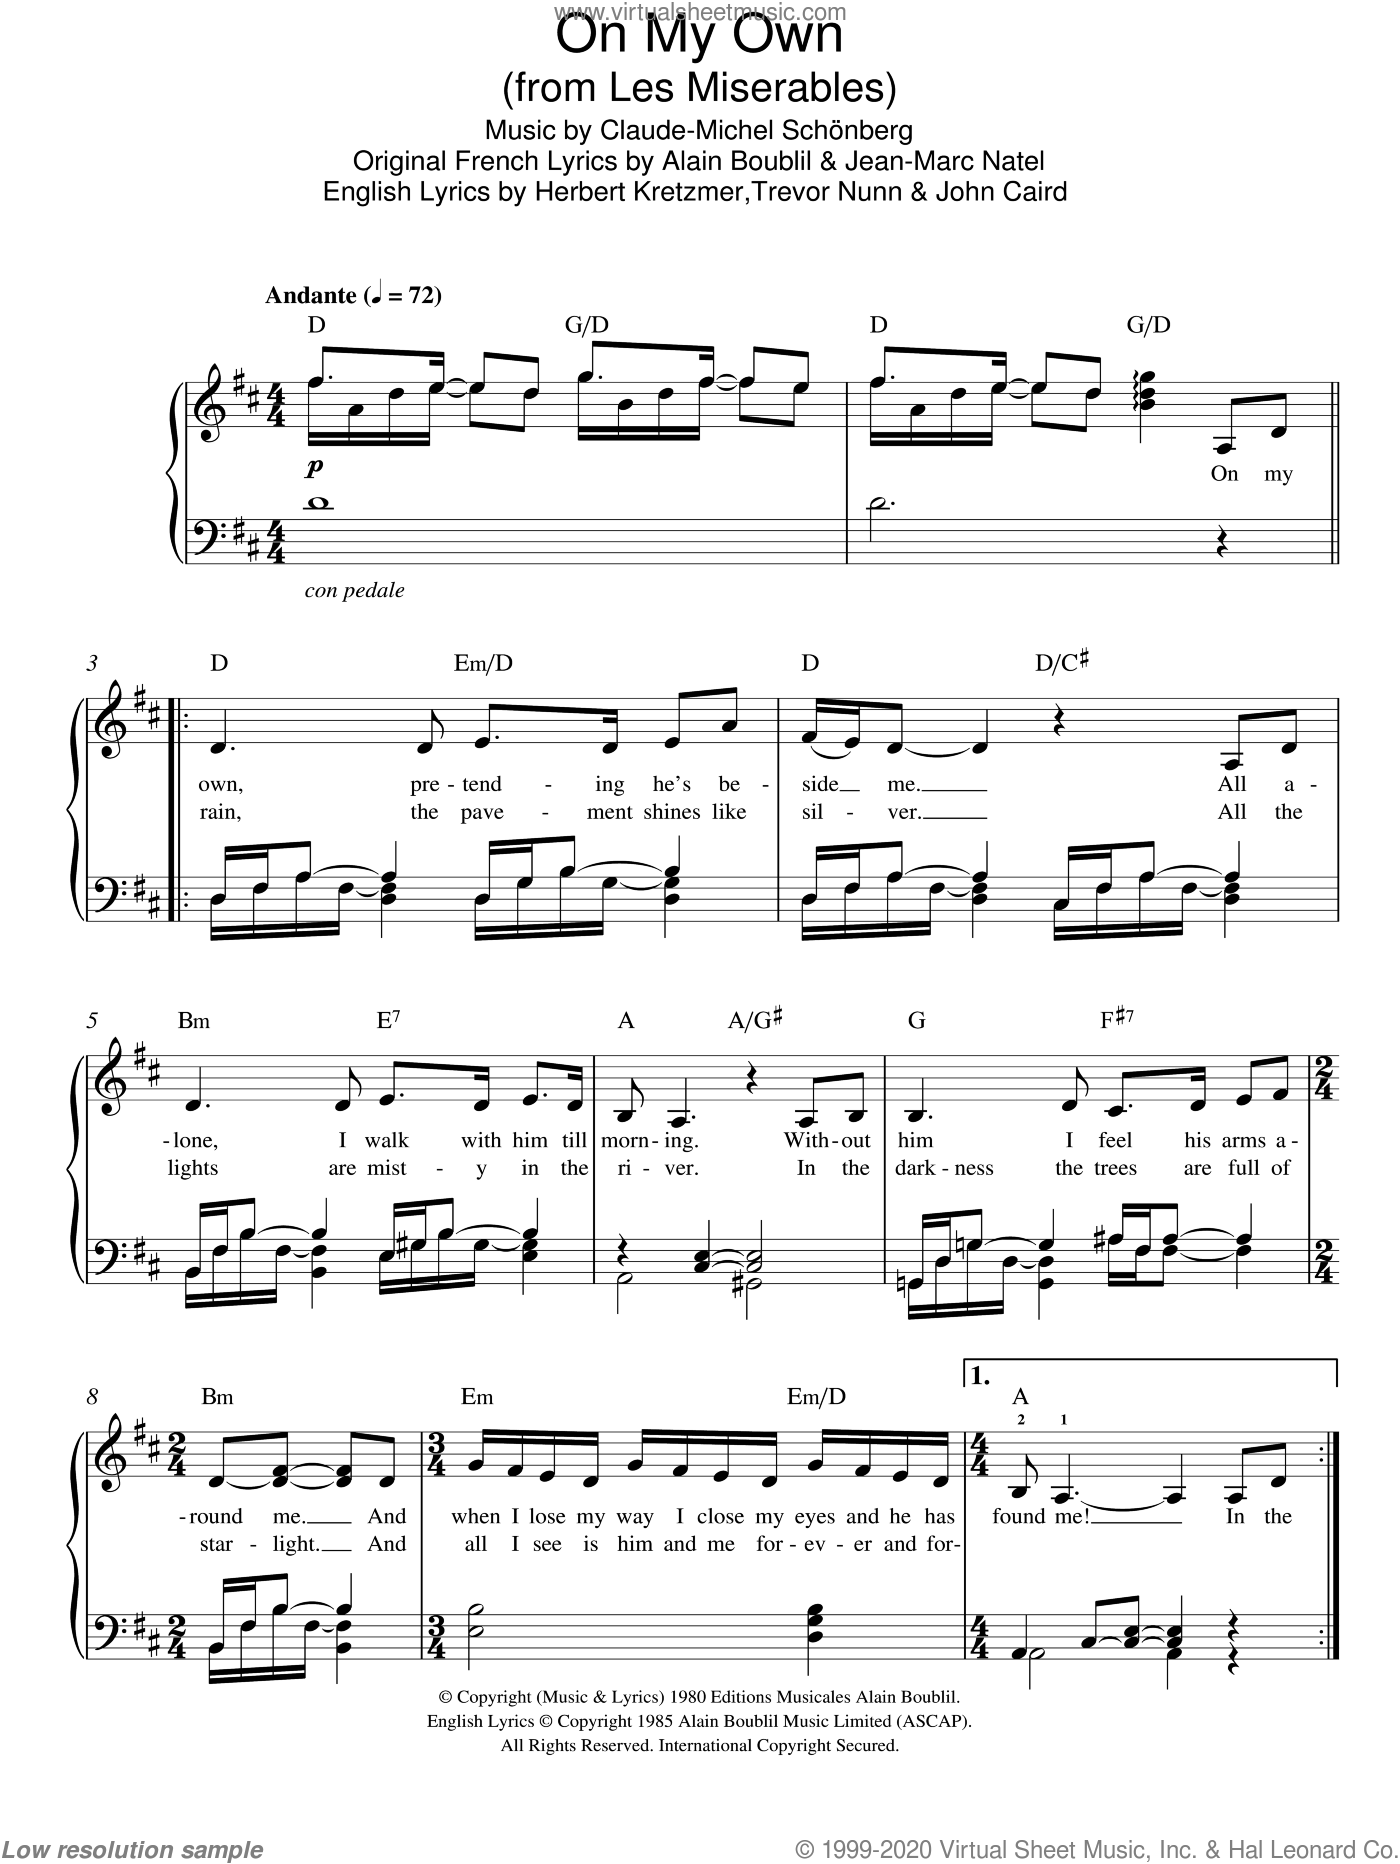 Schonberg - On My Own (from Les Miserables), (easy) sheet music for